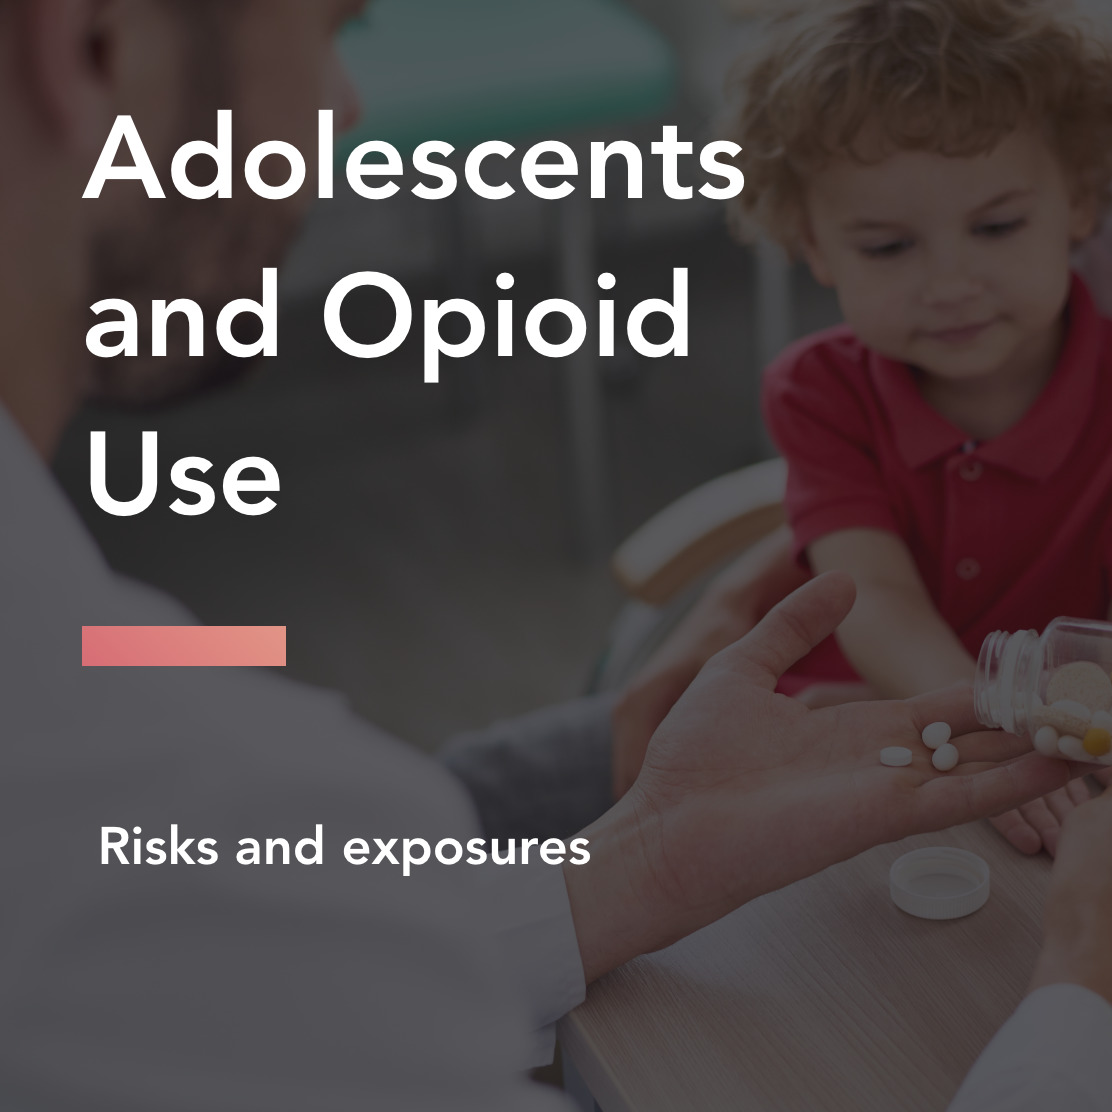 Adolescents and Opioid Use